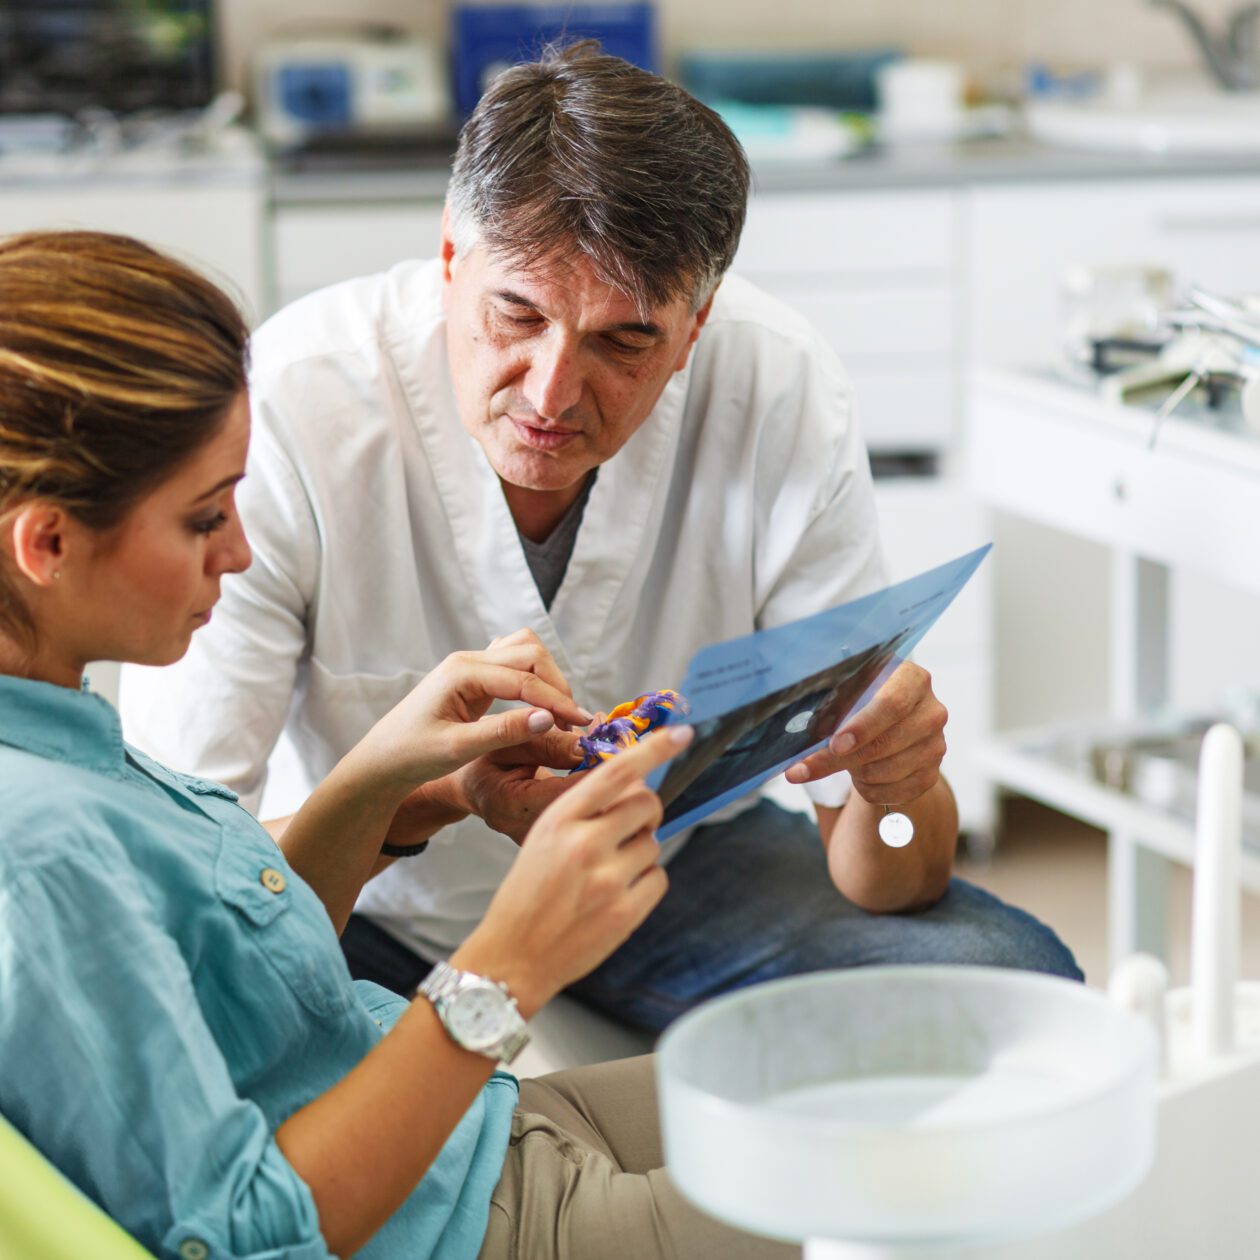 Helping Dental Practices and Labs Succeed Through Smart Guidance